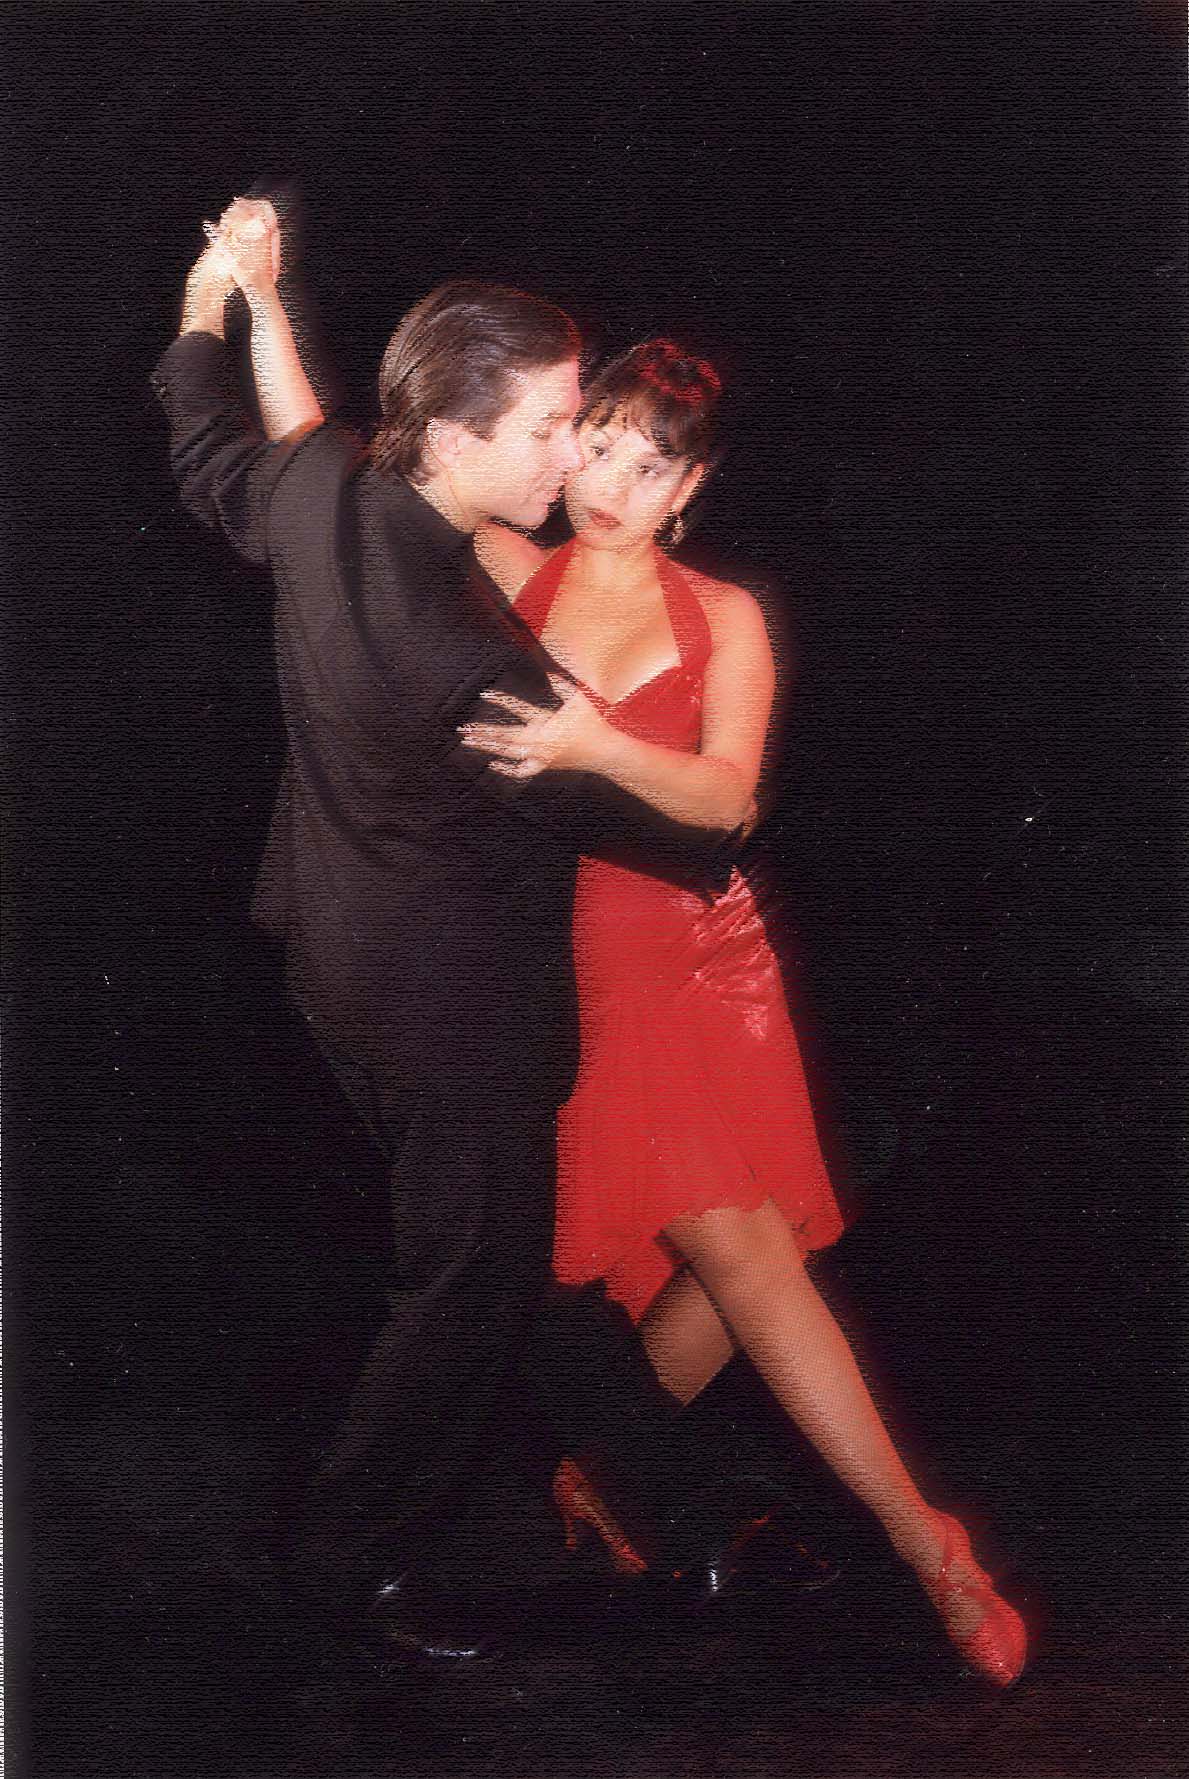 Argentine Tango Social Networking Website Offers Free